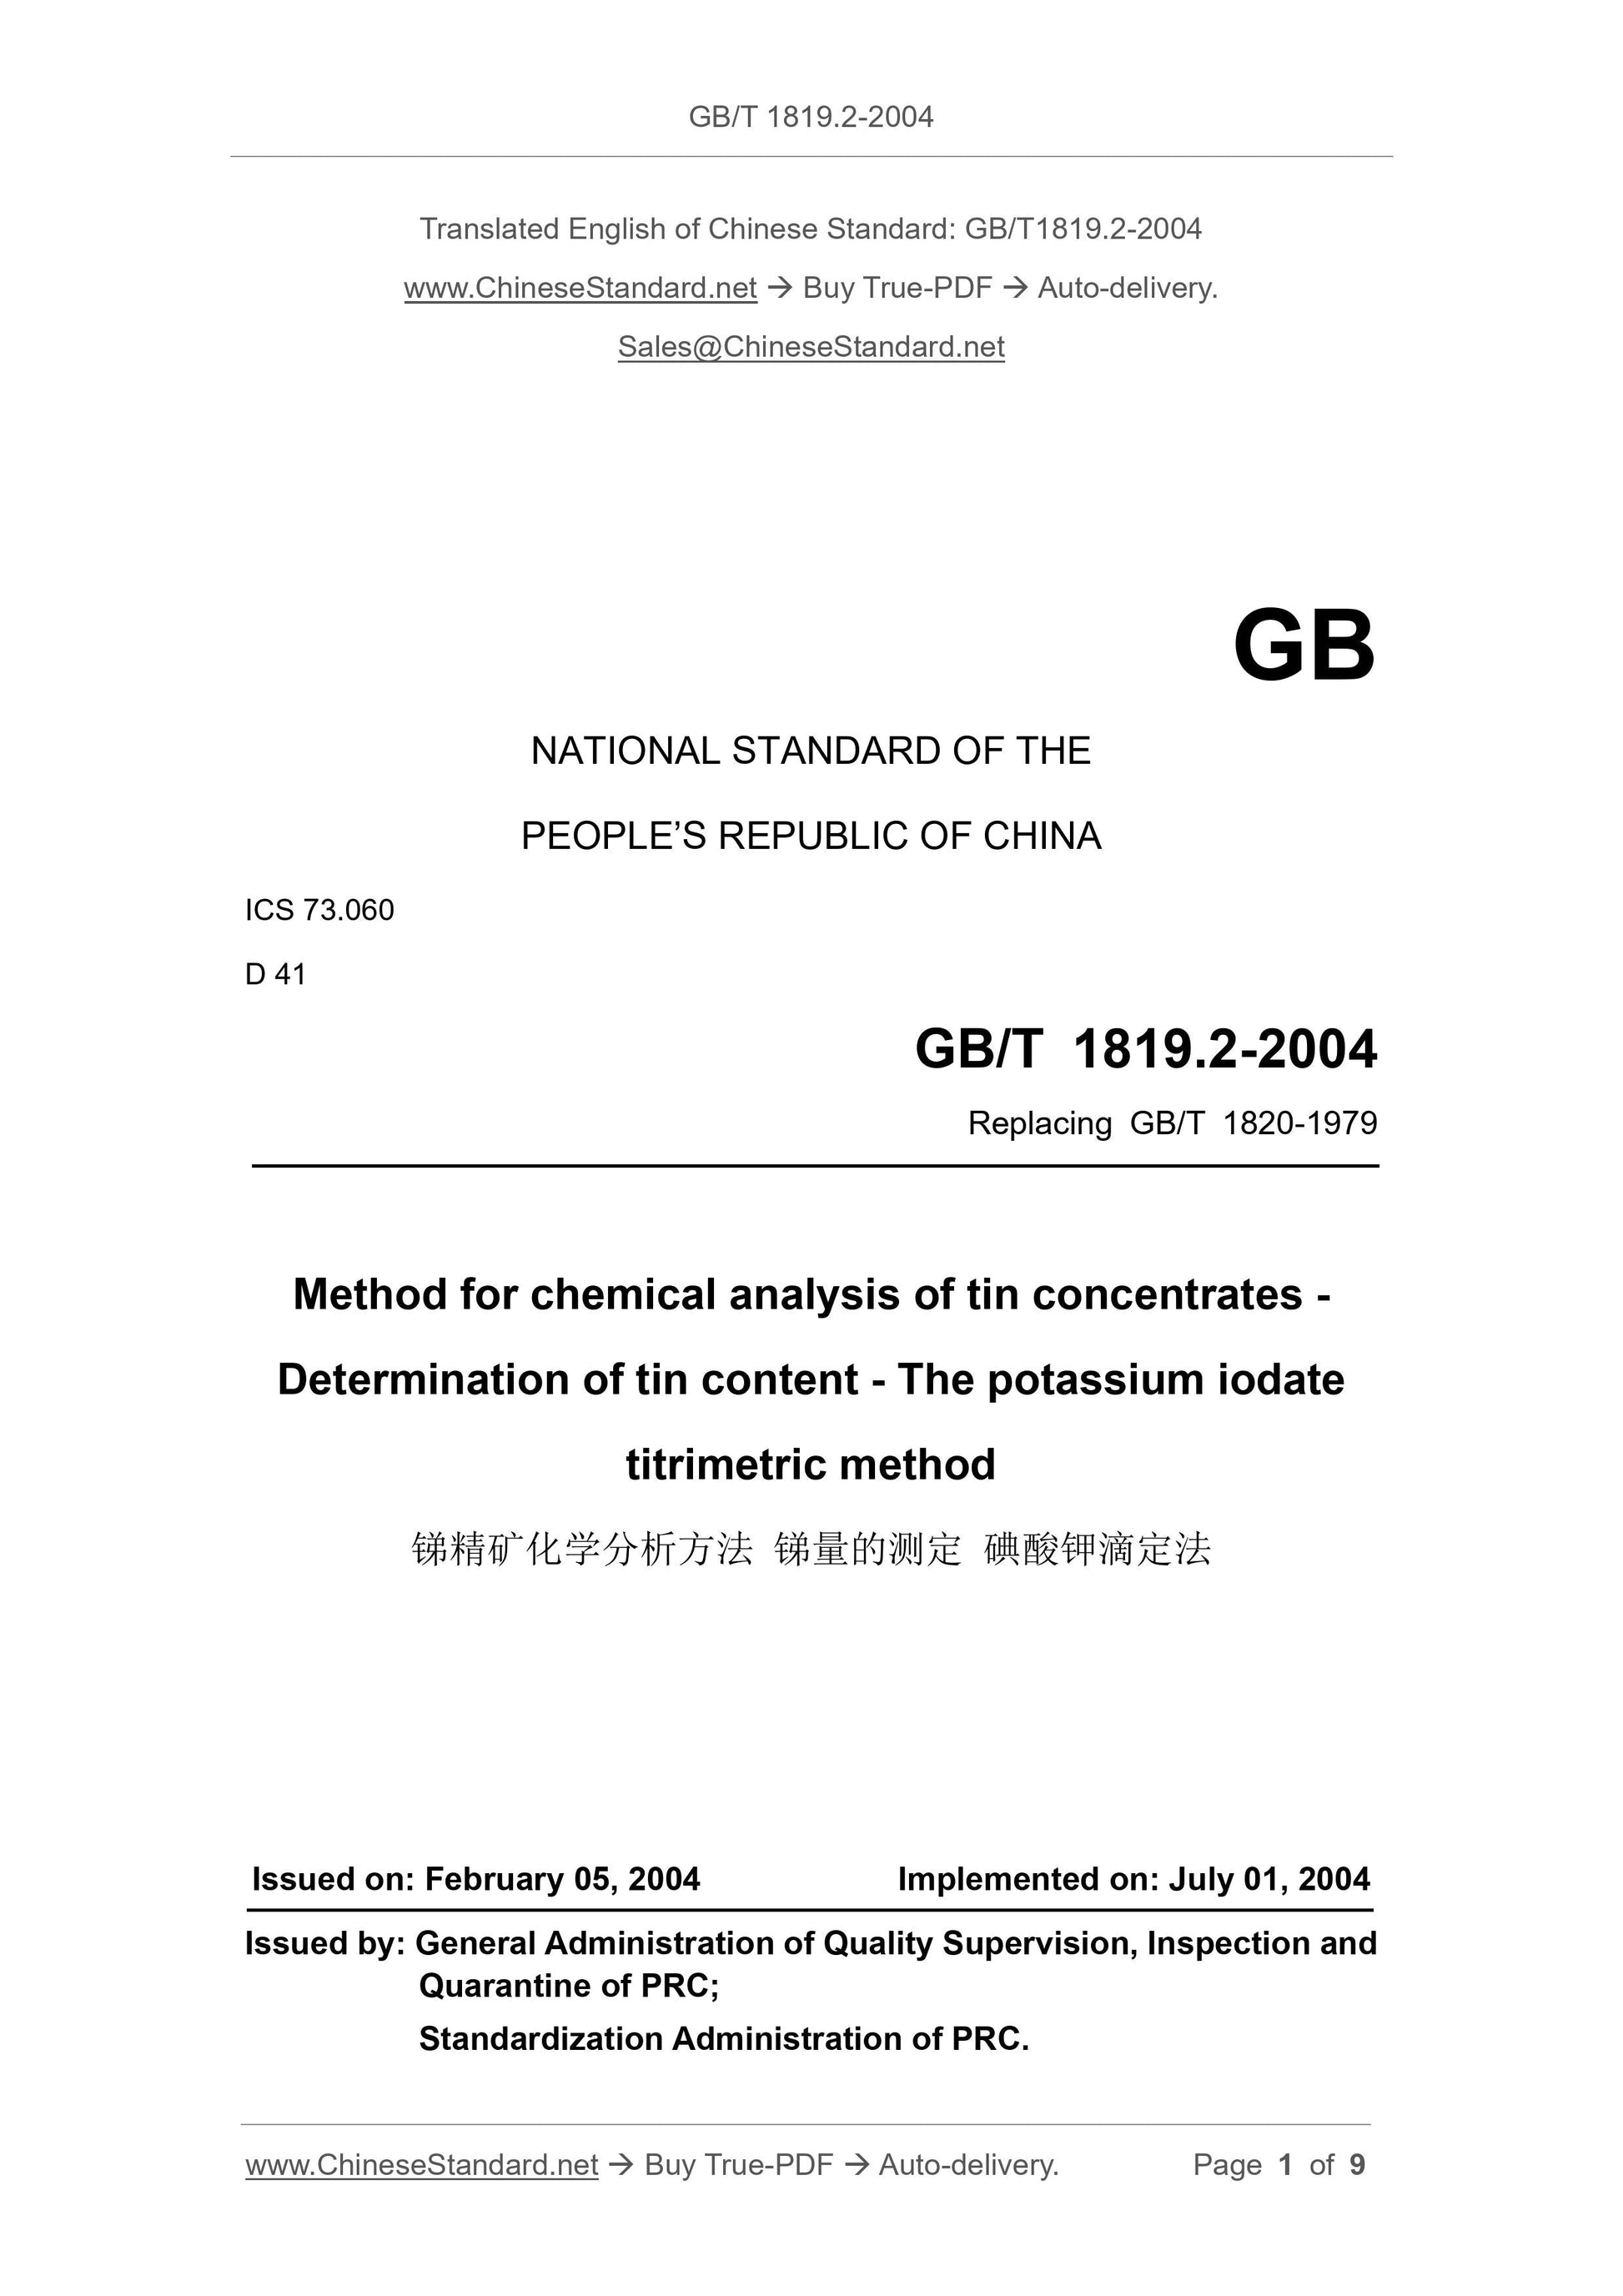 GB/T 1819.2-2004 Page 1